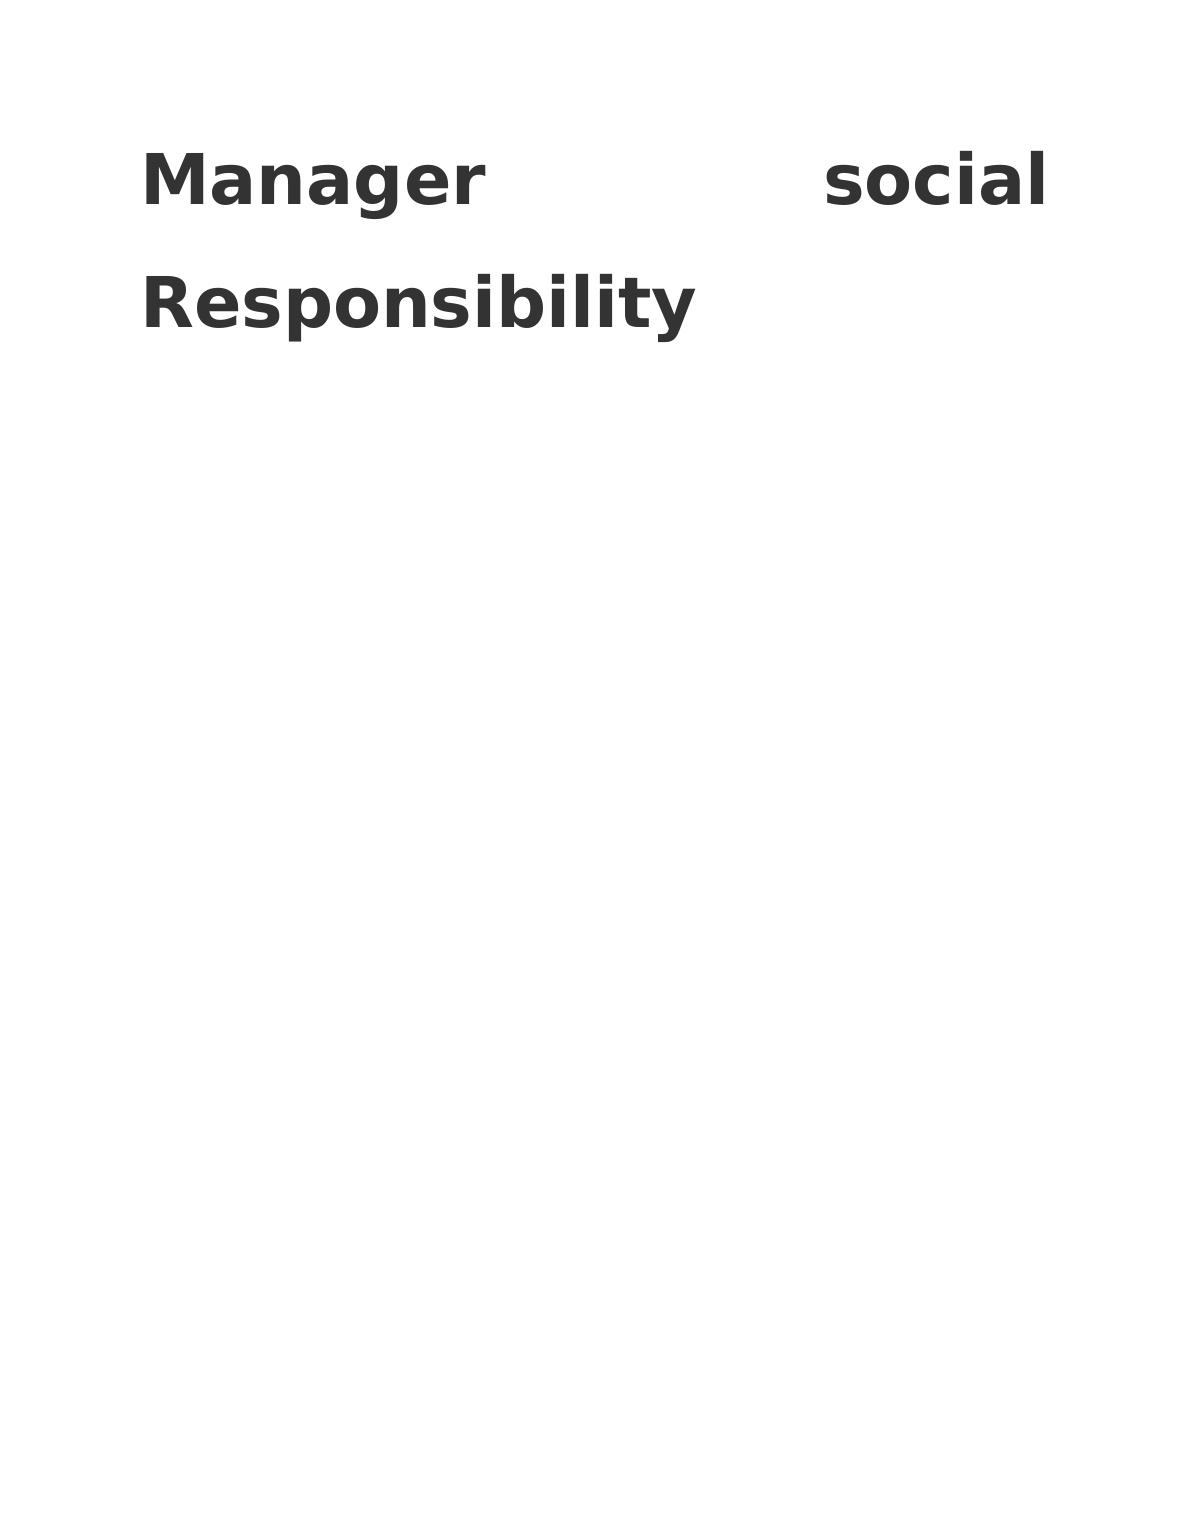 assignment on corporate social responsibility